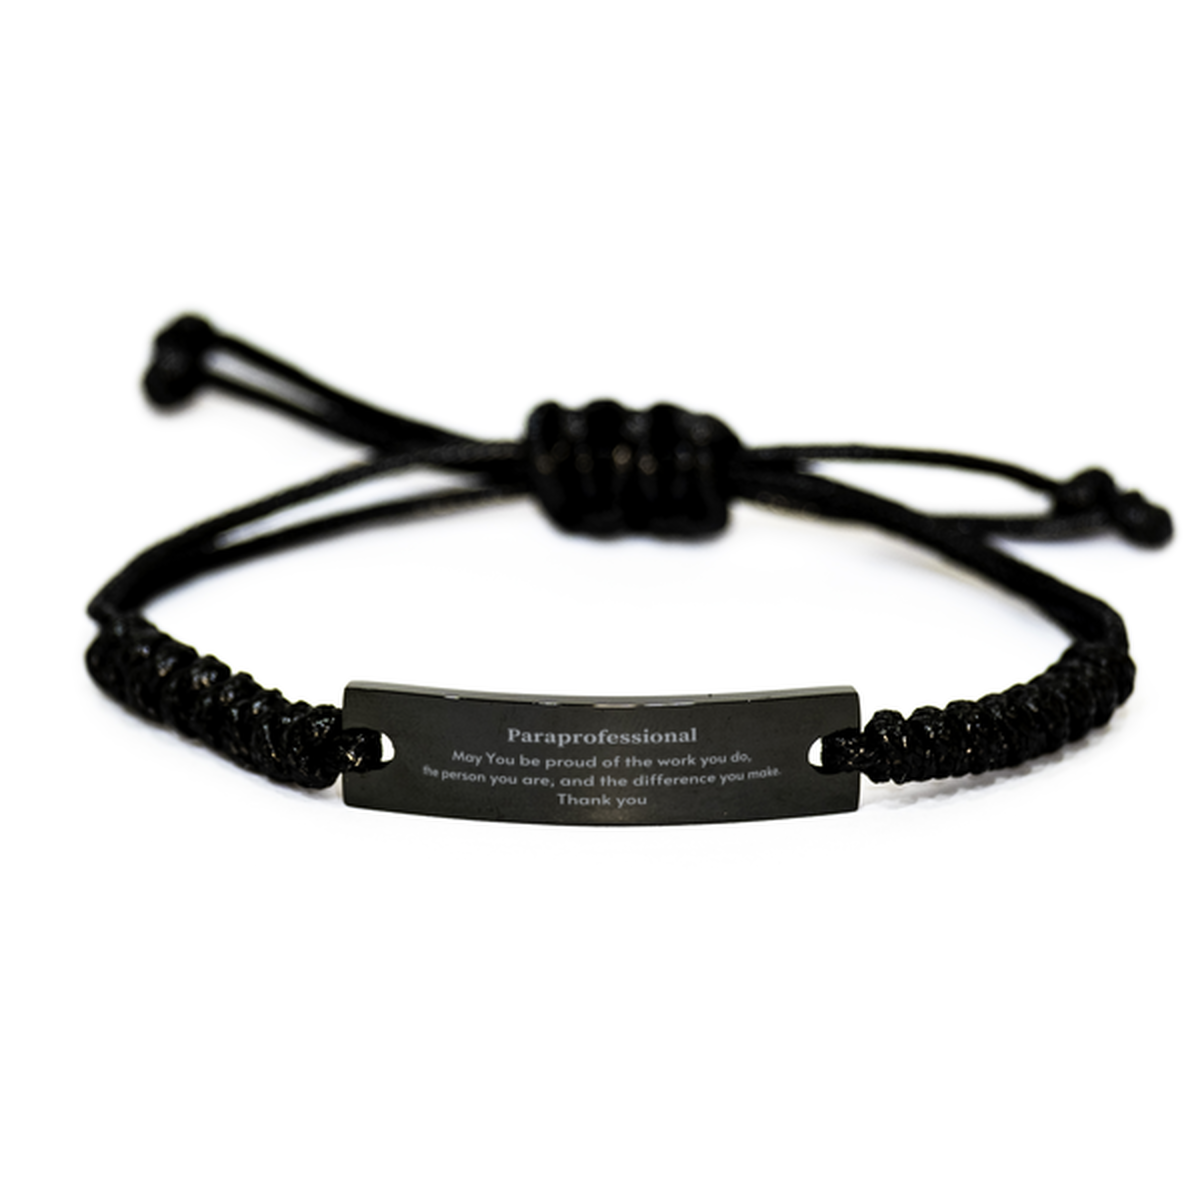 Heartwarming Black Rope Bracelet Retirement Coworkers Gifts for Paraprofessional, Paraprofessional May You be proud of the work you do, the person you are Gifts for Boss Men Women Friends